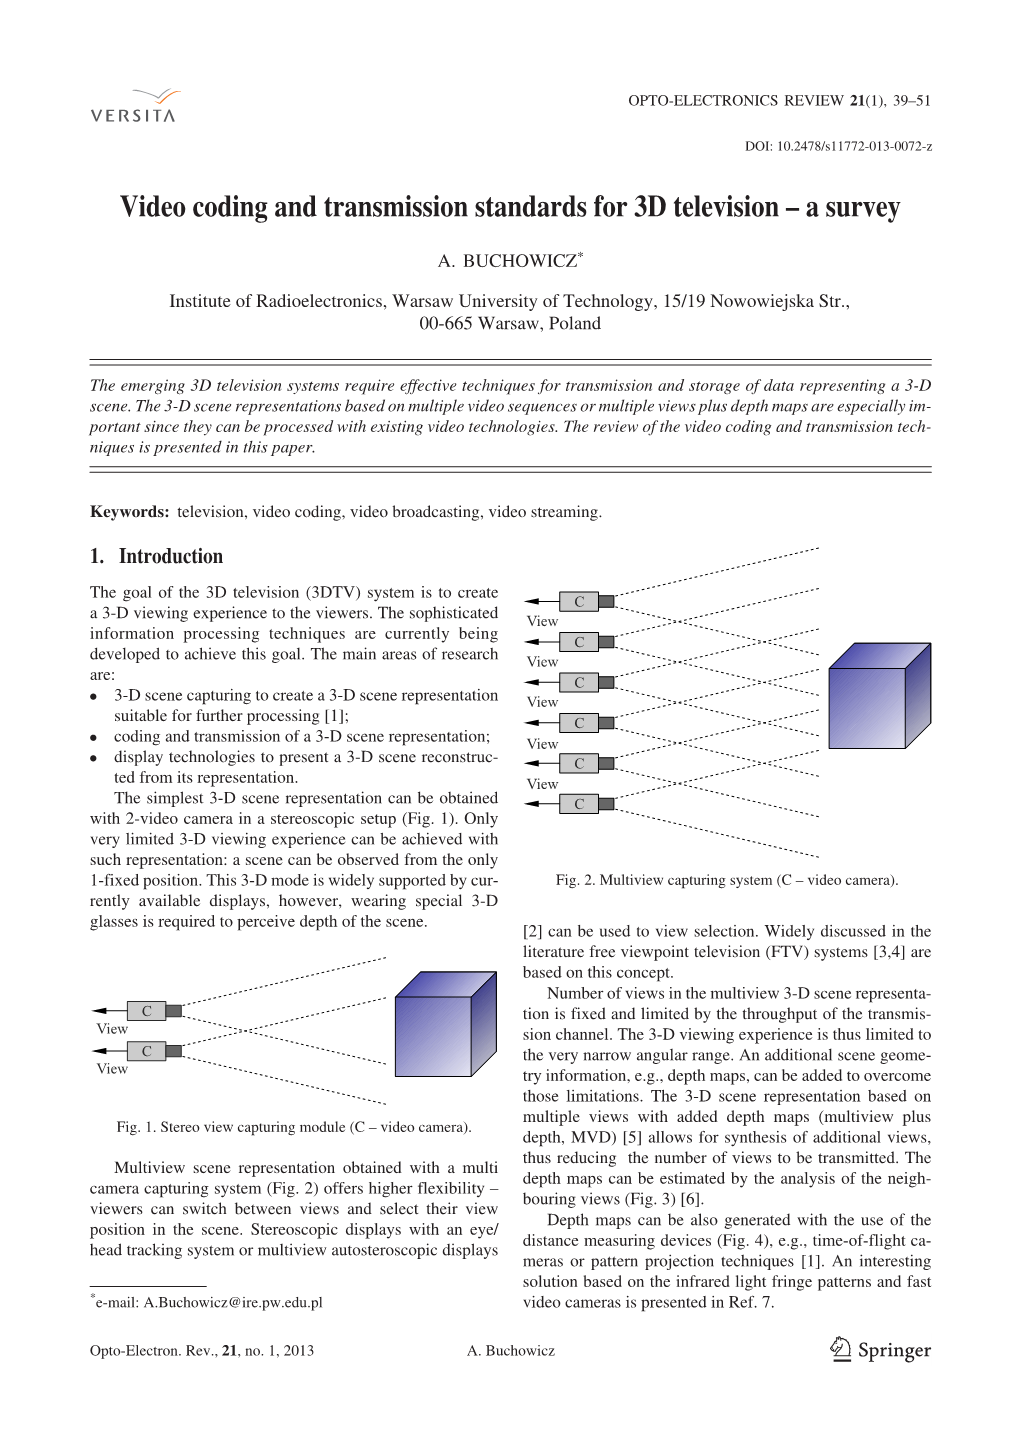 Video Coding and Transmission Standards for 3D Television – a Survey